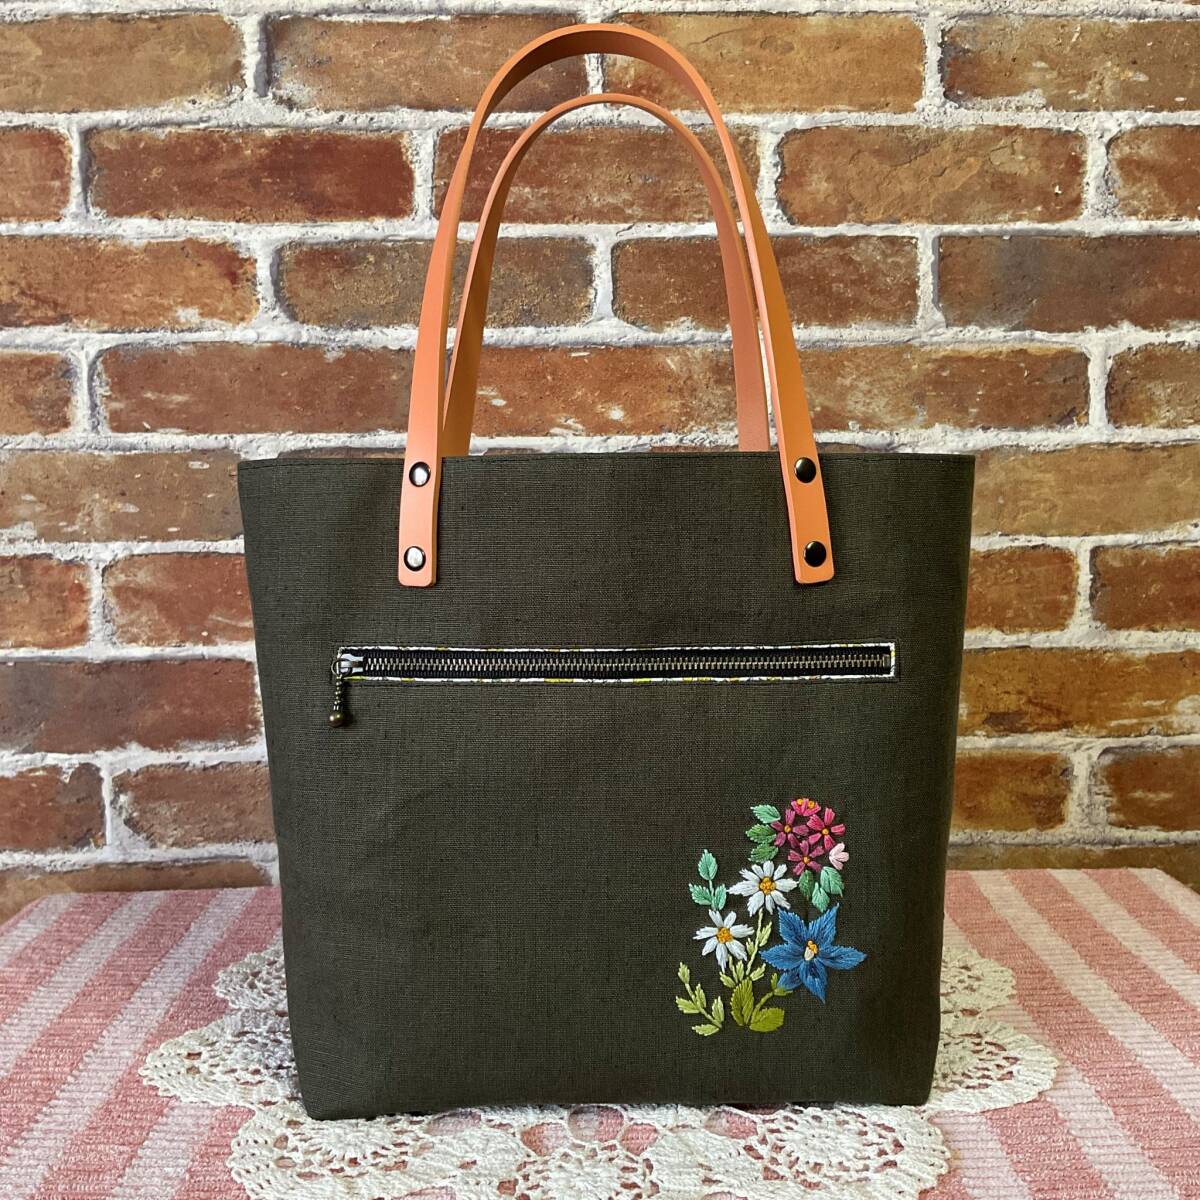  hand made hand embroidery linen Switzerland Alps. flower original leather keep hand tote bag 